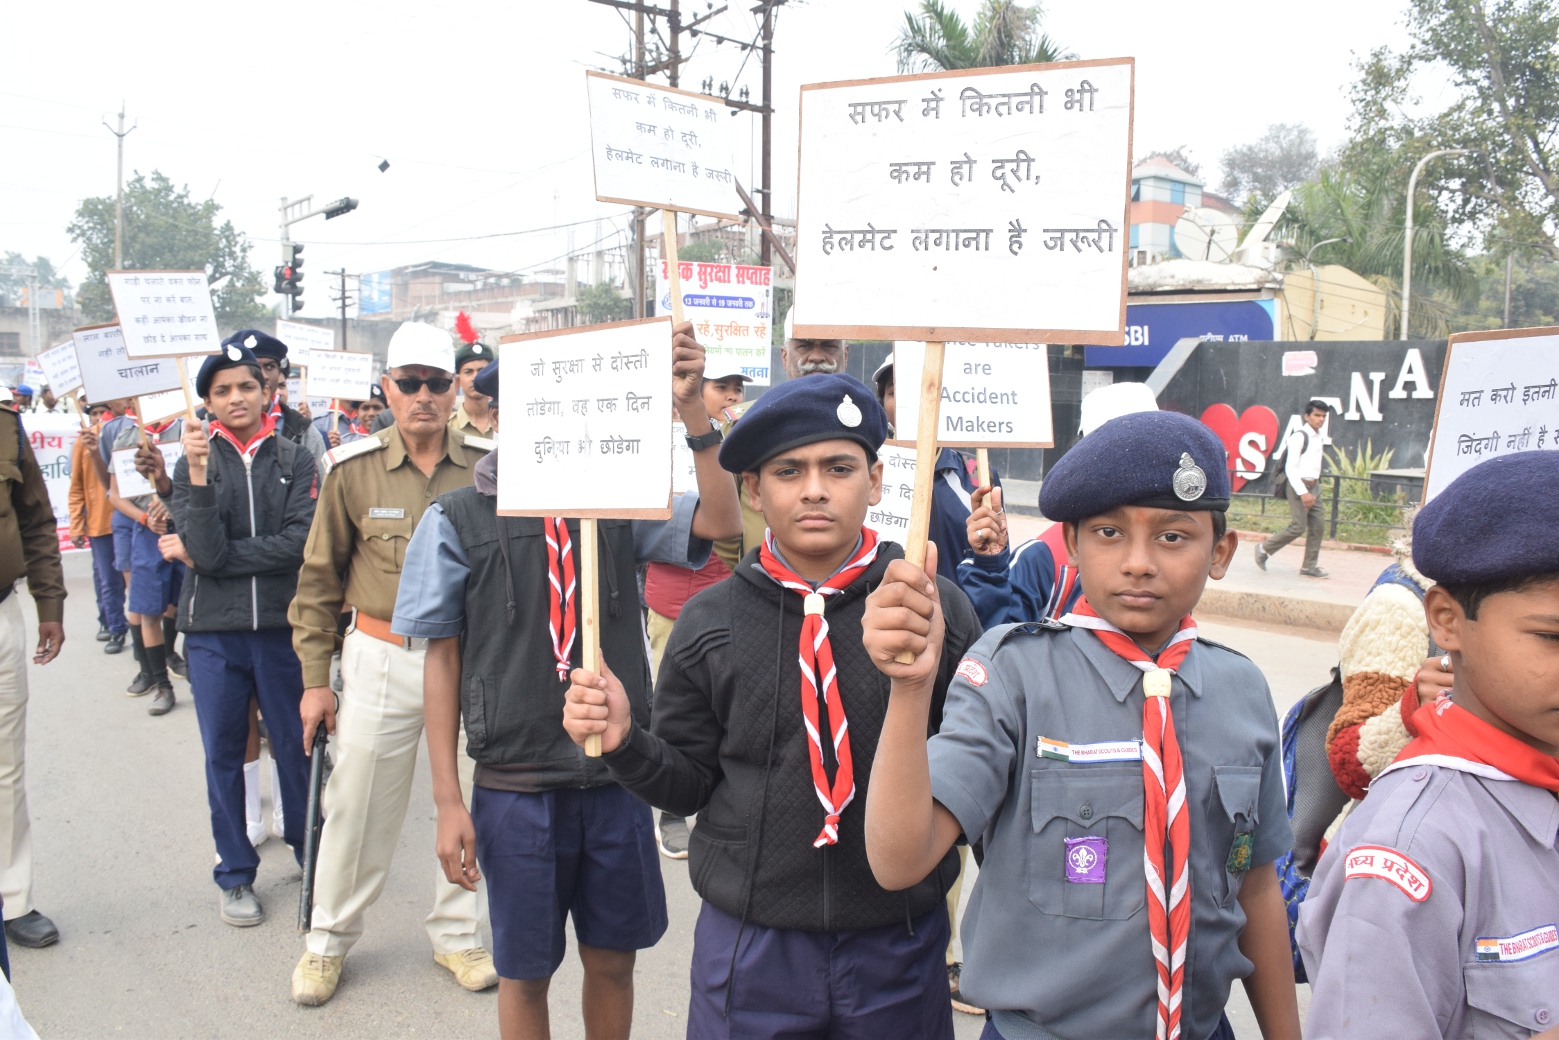 Children took out rally, SP distributed helmet,